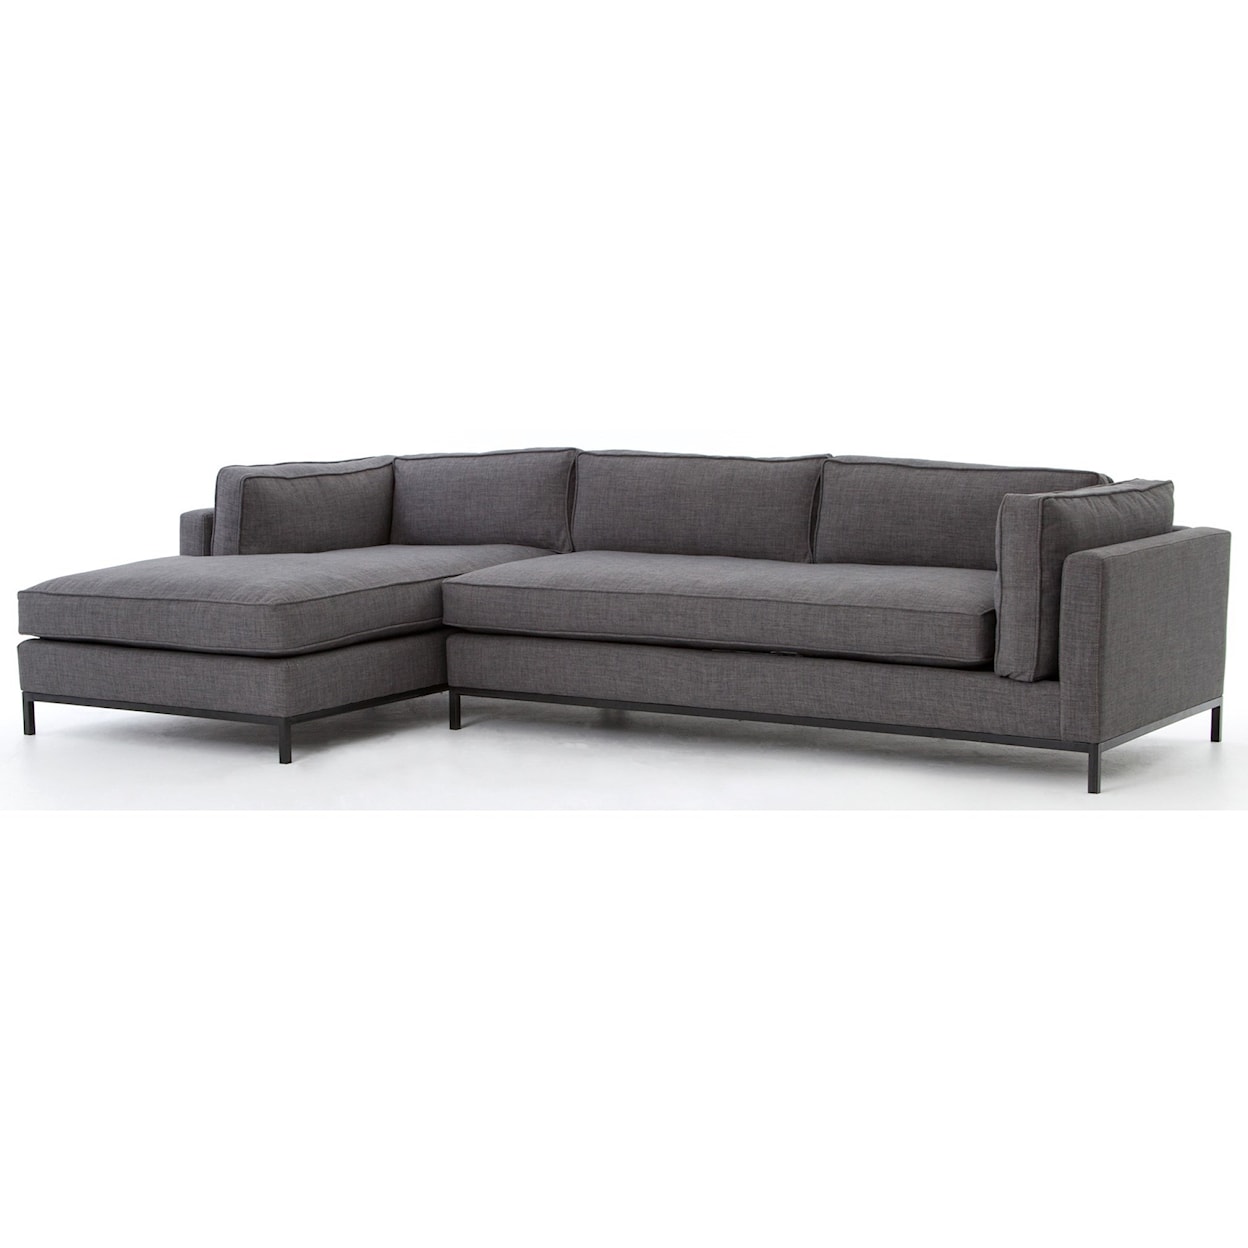 Four Hands Atelier Grammercy 2 Pc Sectional Left Arm Chaise